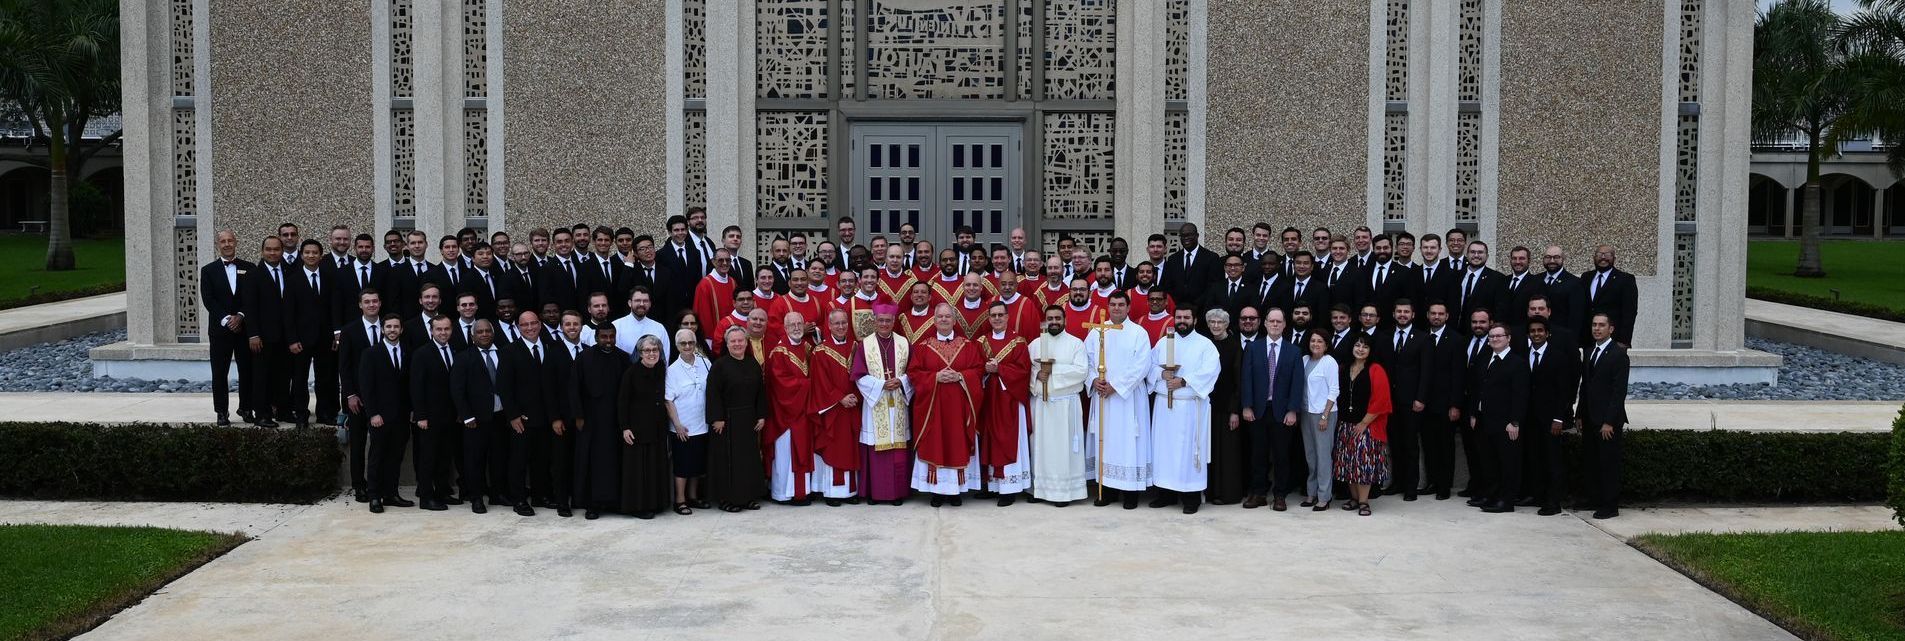 Group photo of Seminarians and Staff from the Academic year 2017-2018